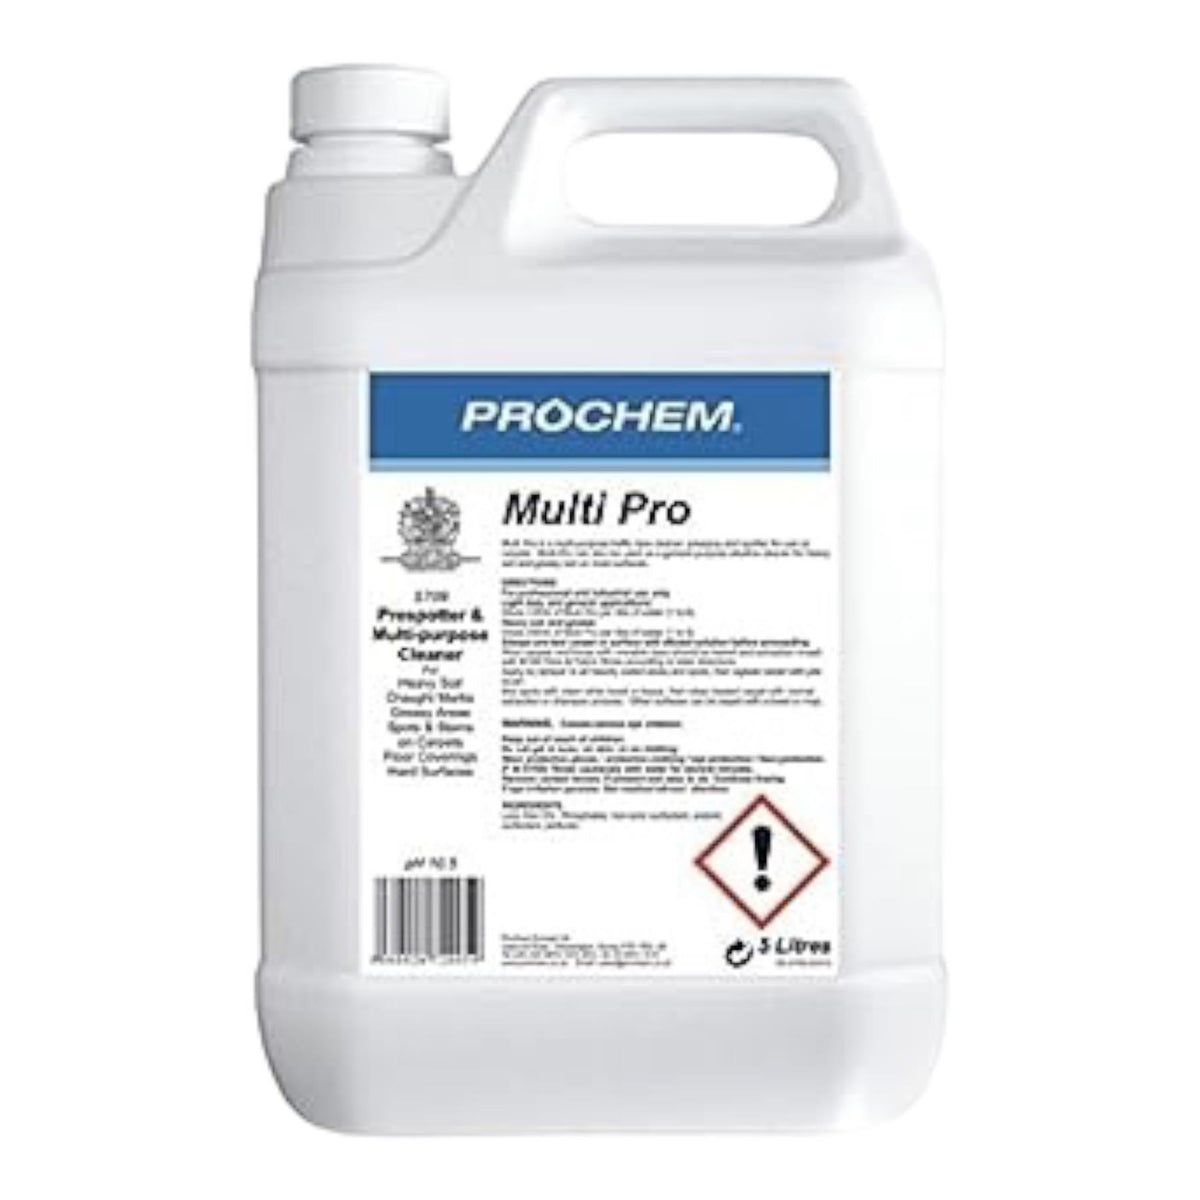 Prochem Multi Pro 5 Litres Pre-Spotter and Pre-spray for Carpet Cleaning